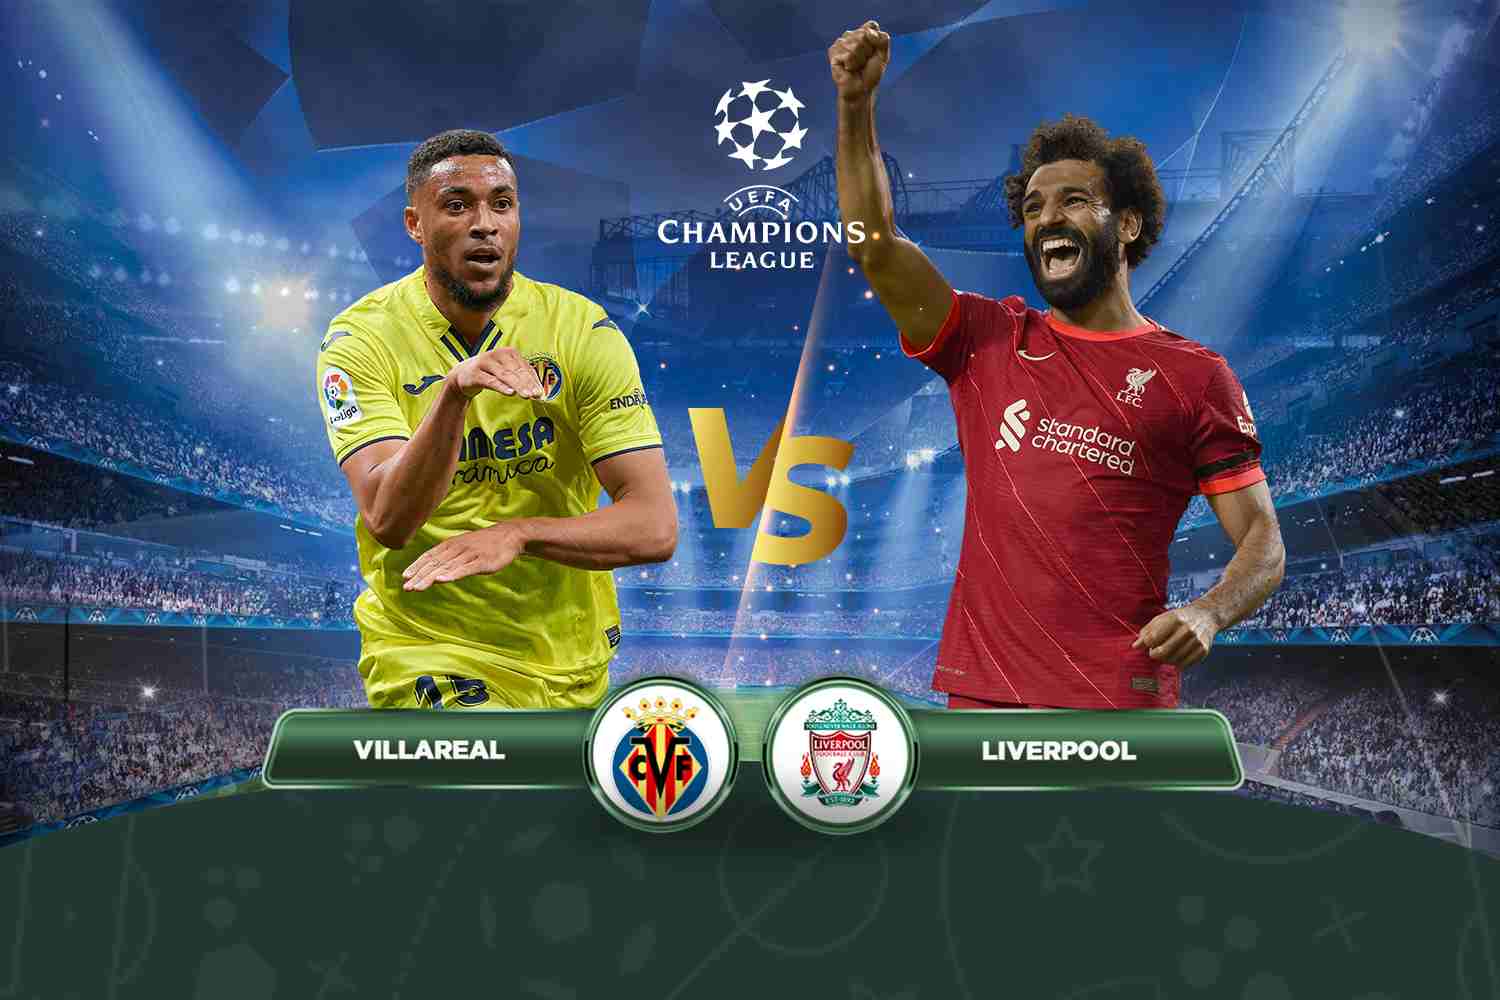 Villarreal vs Liverpool: Match Preview and Betting Prediction